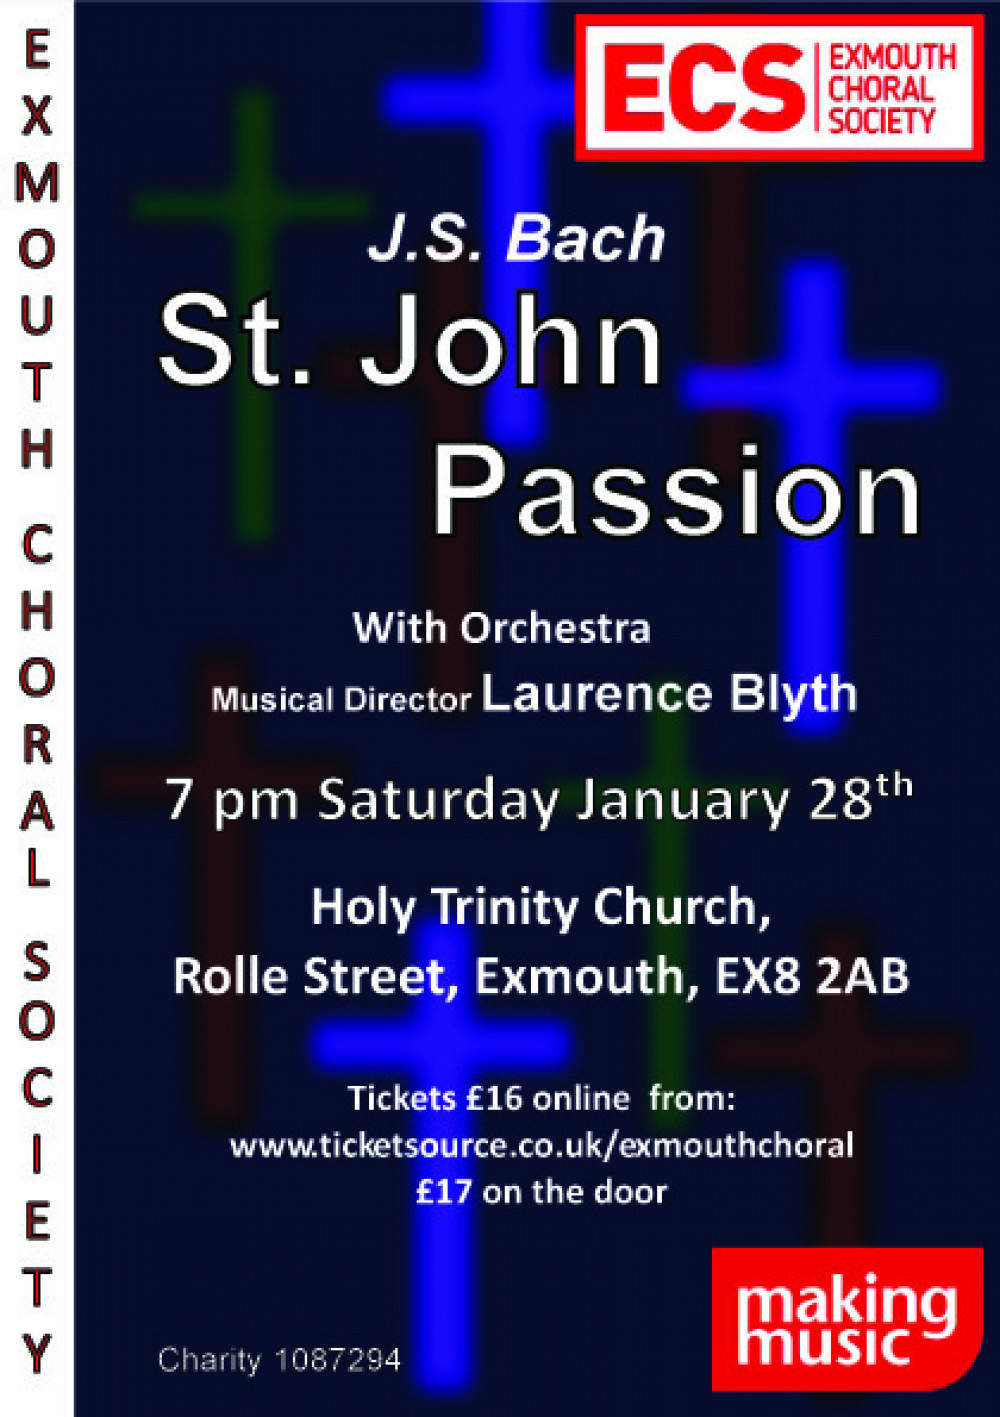 J.S. Bach St John Passion sung by Exmouth Choral Society